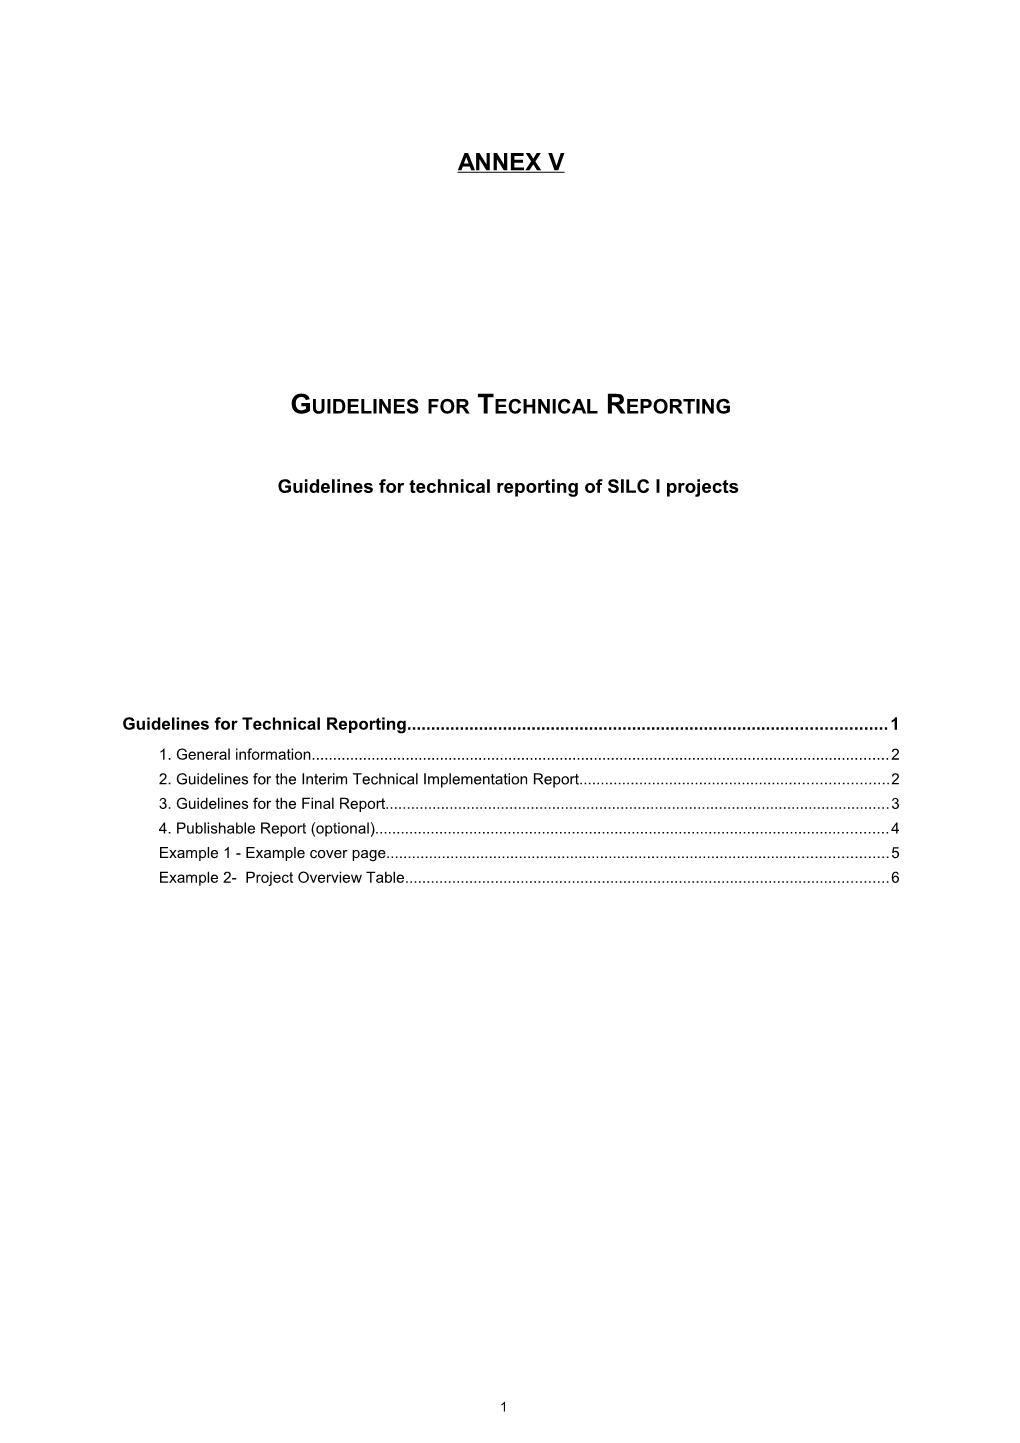 Guidelines for Technical Reporting